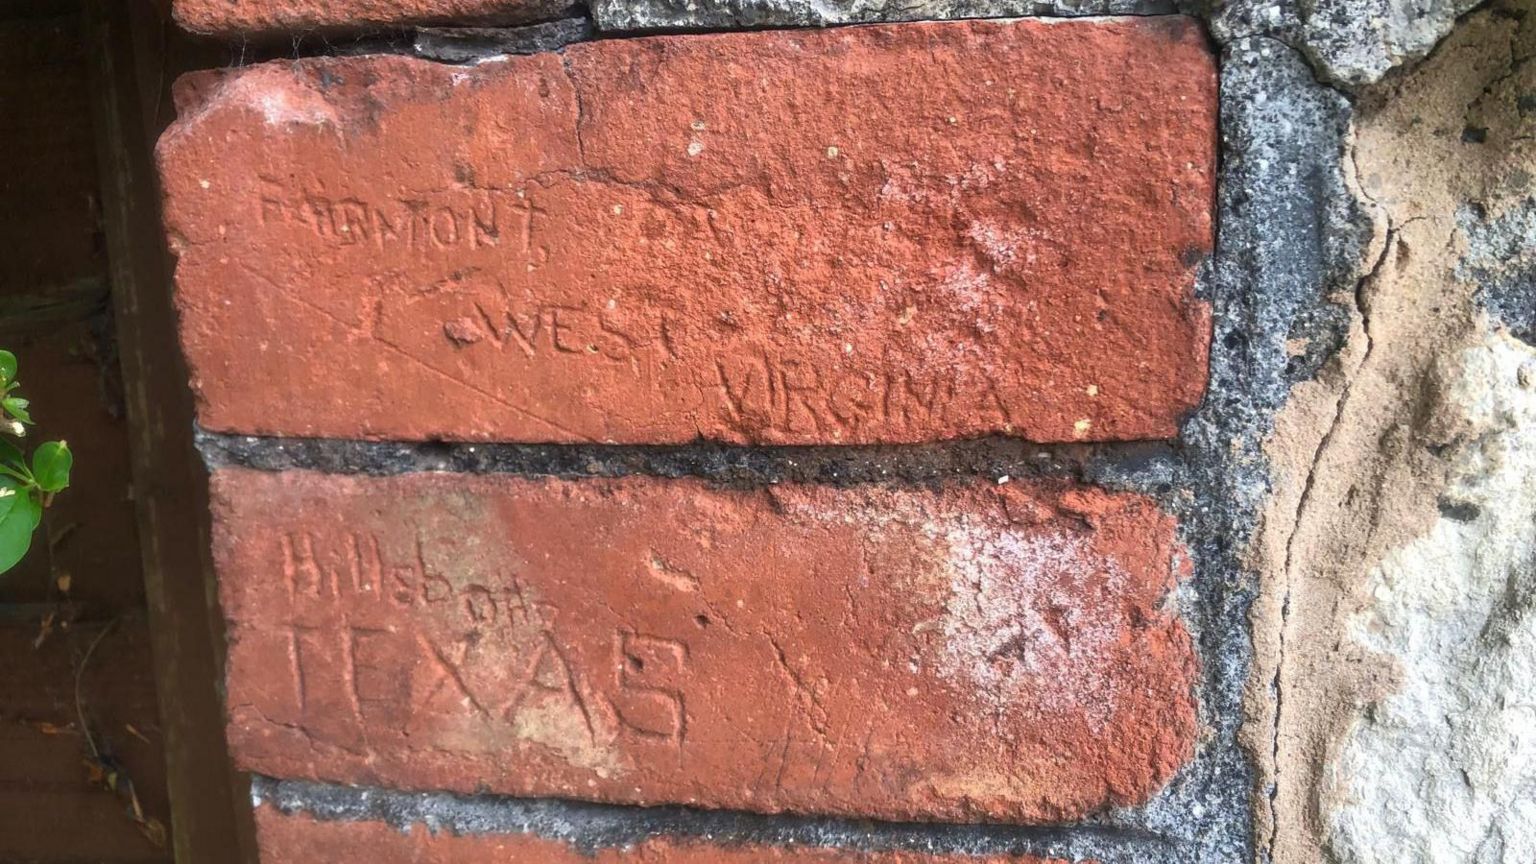 A red brick wall with American place 'Hillsboro Texas' inscribed on. 